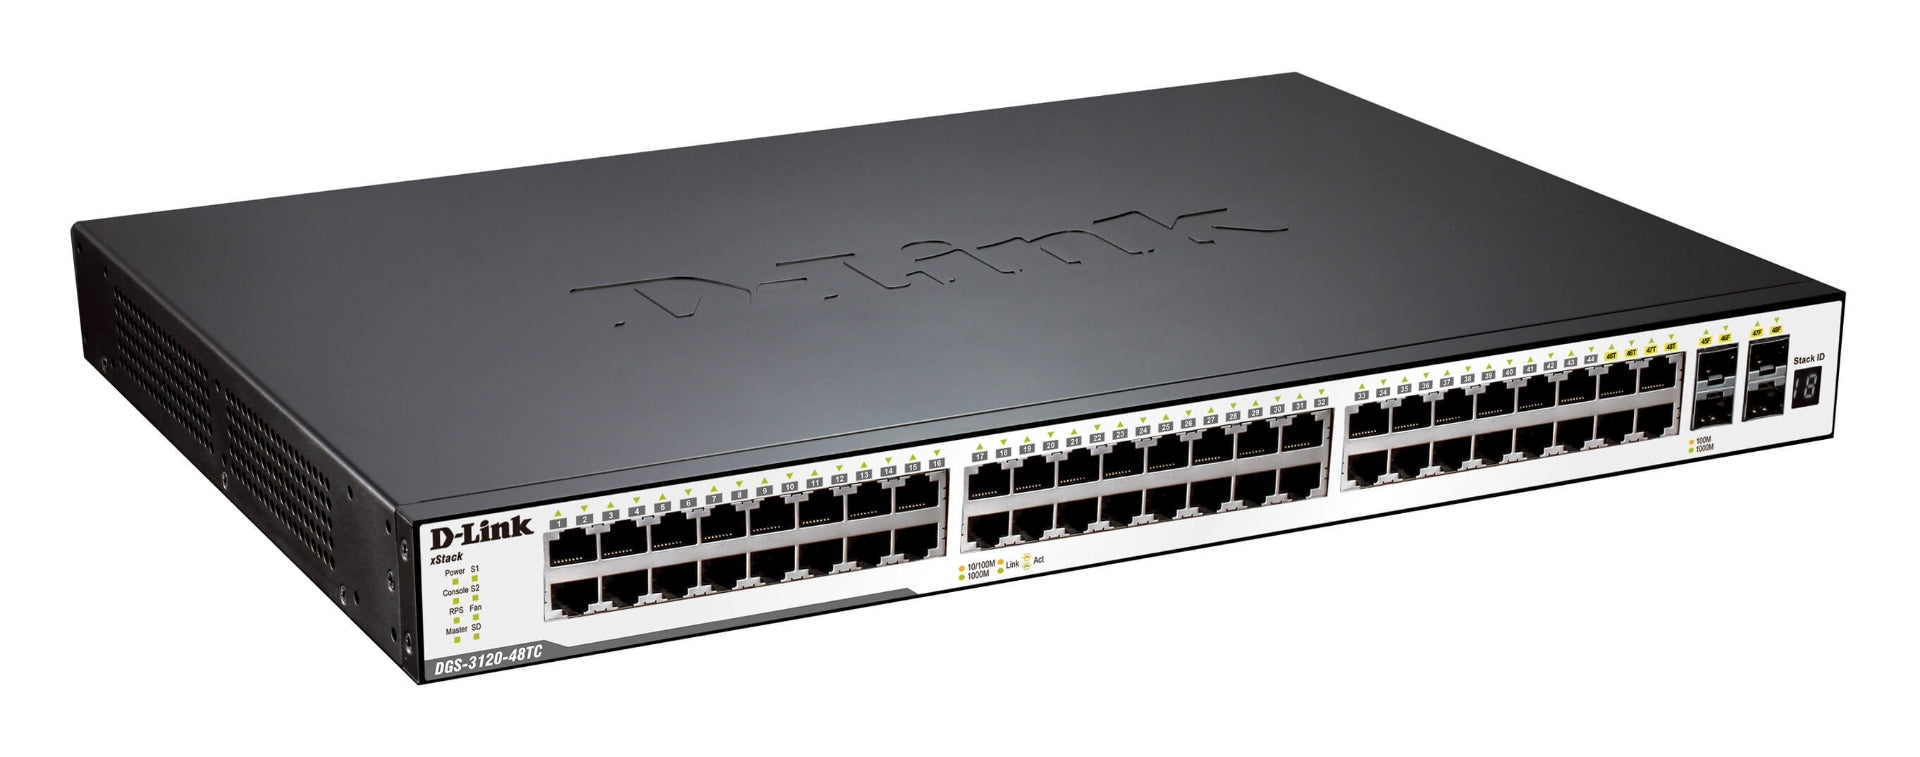 SWITCH 48 PORT 4 X SFP/GIGA PORTS + PHY. STACK PORTS UPTO 40GBPS, SDCARD, L2/L3 MANAGED